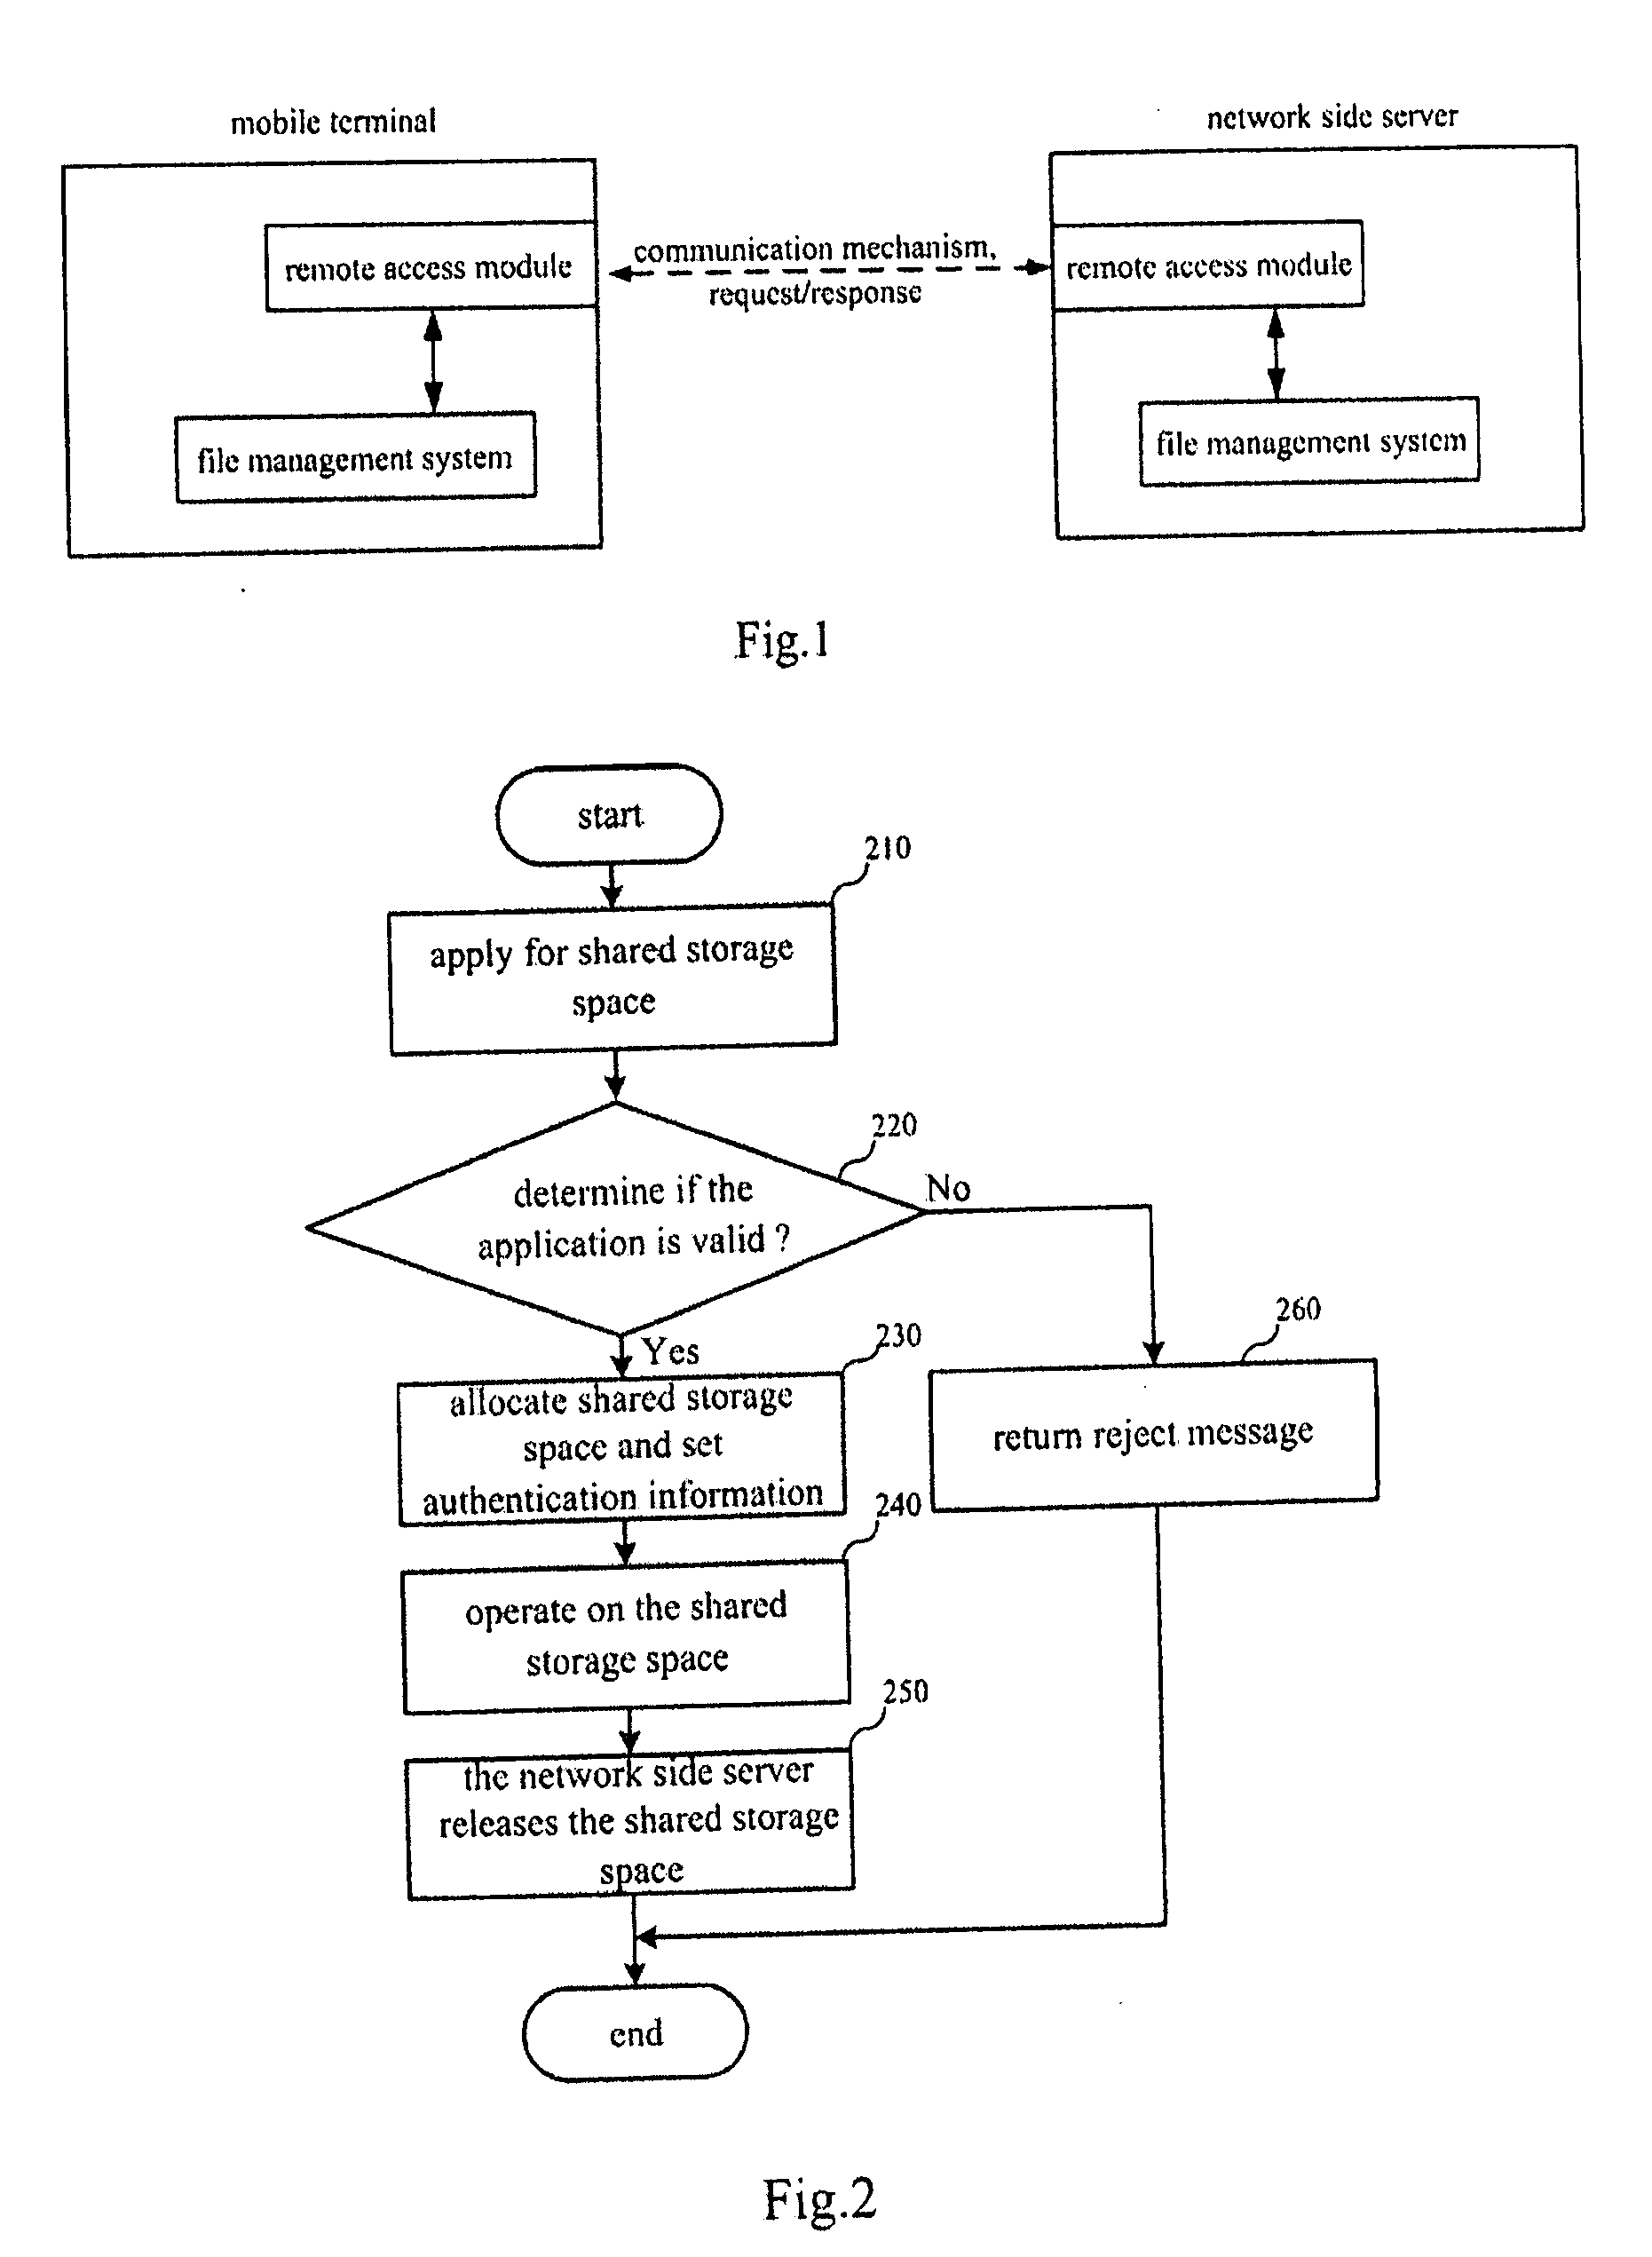 Method and System for Mobile Terminals to Share Storage Space